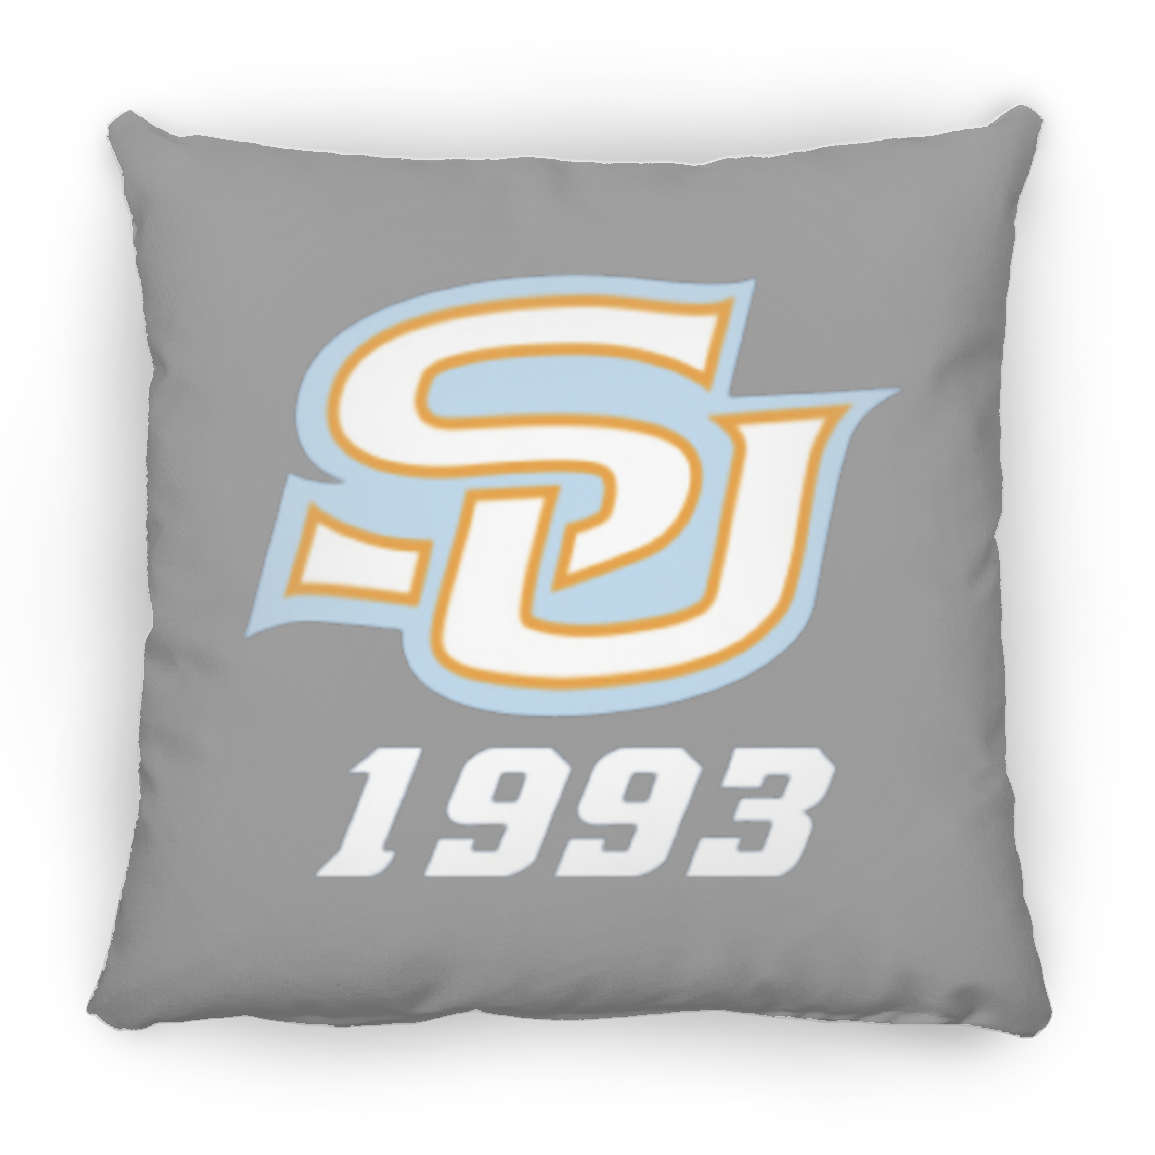 SU 1993 ZP18 Large Square Pillow